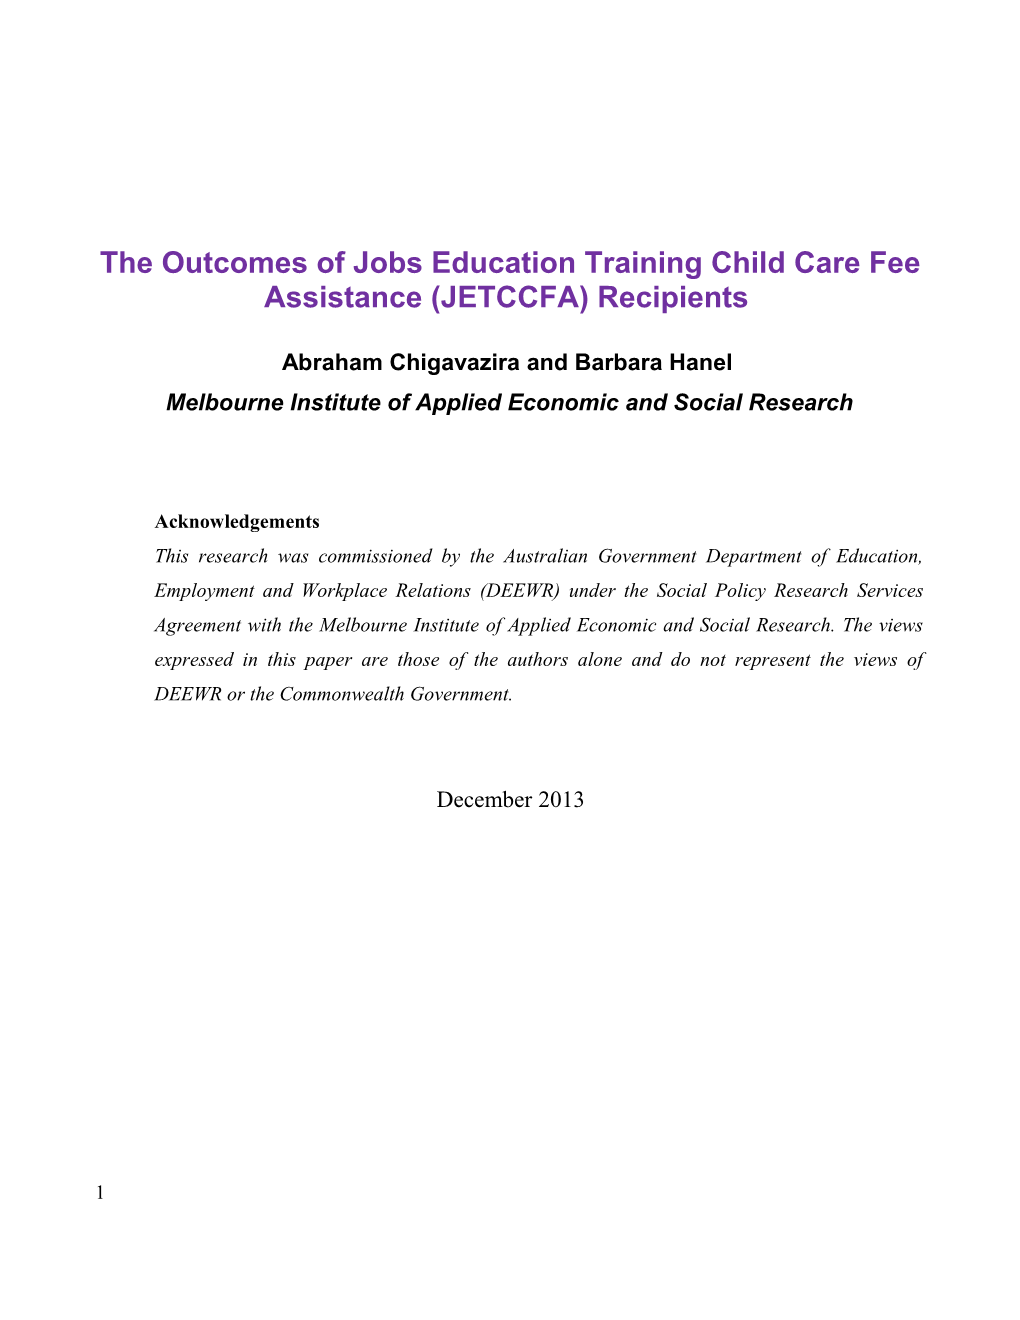 The Outcomes of JETCCFA Recipients